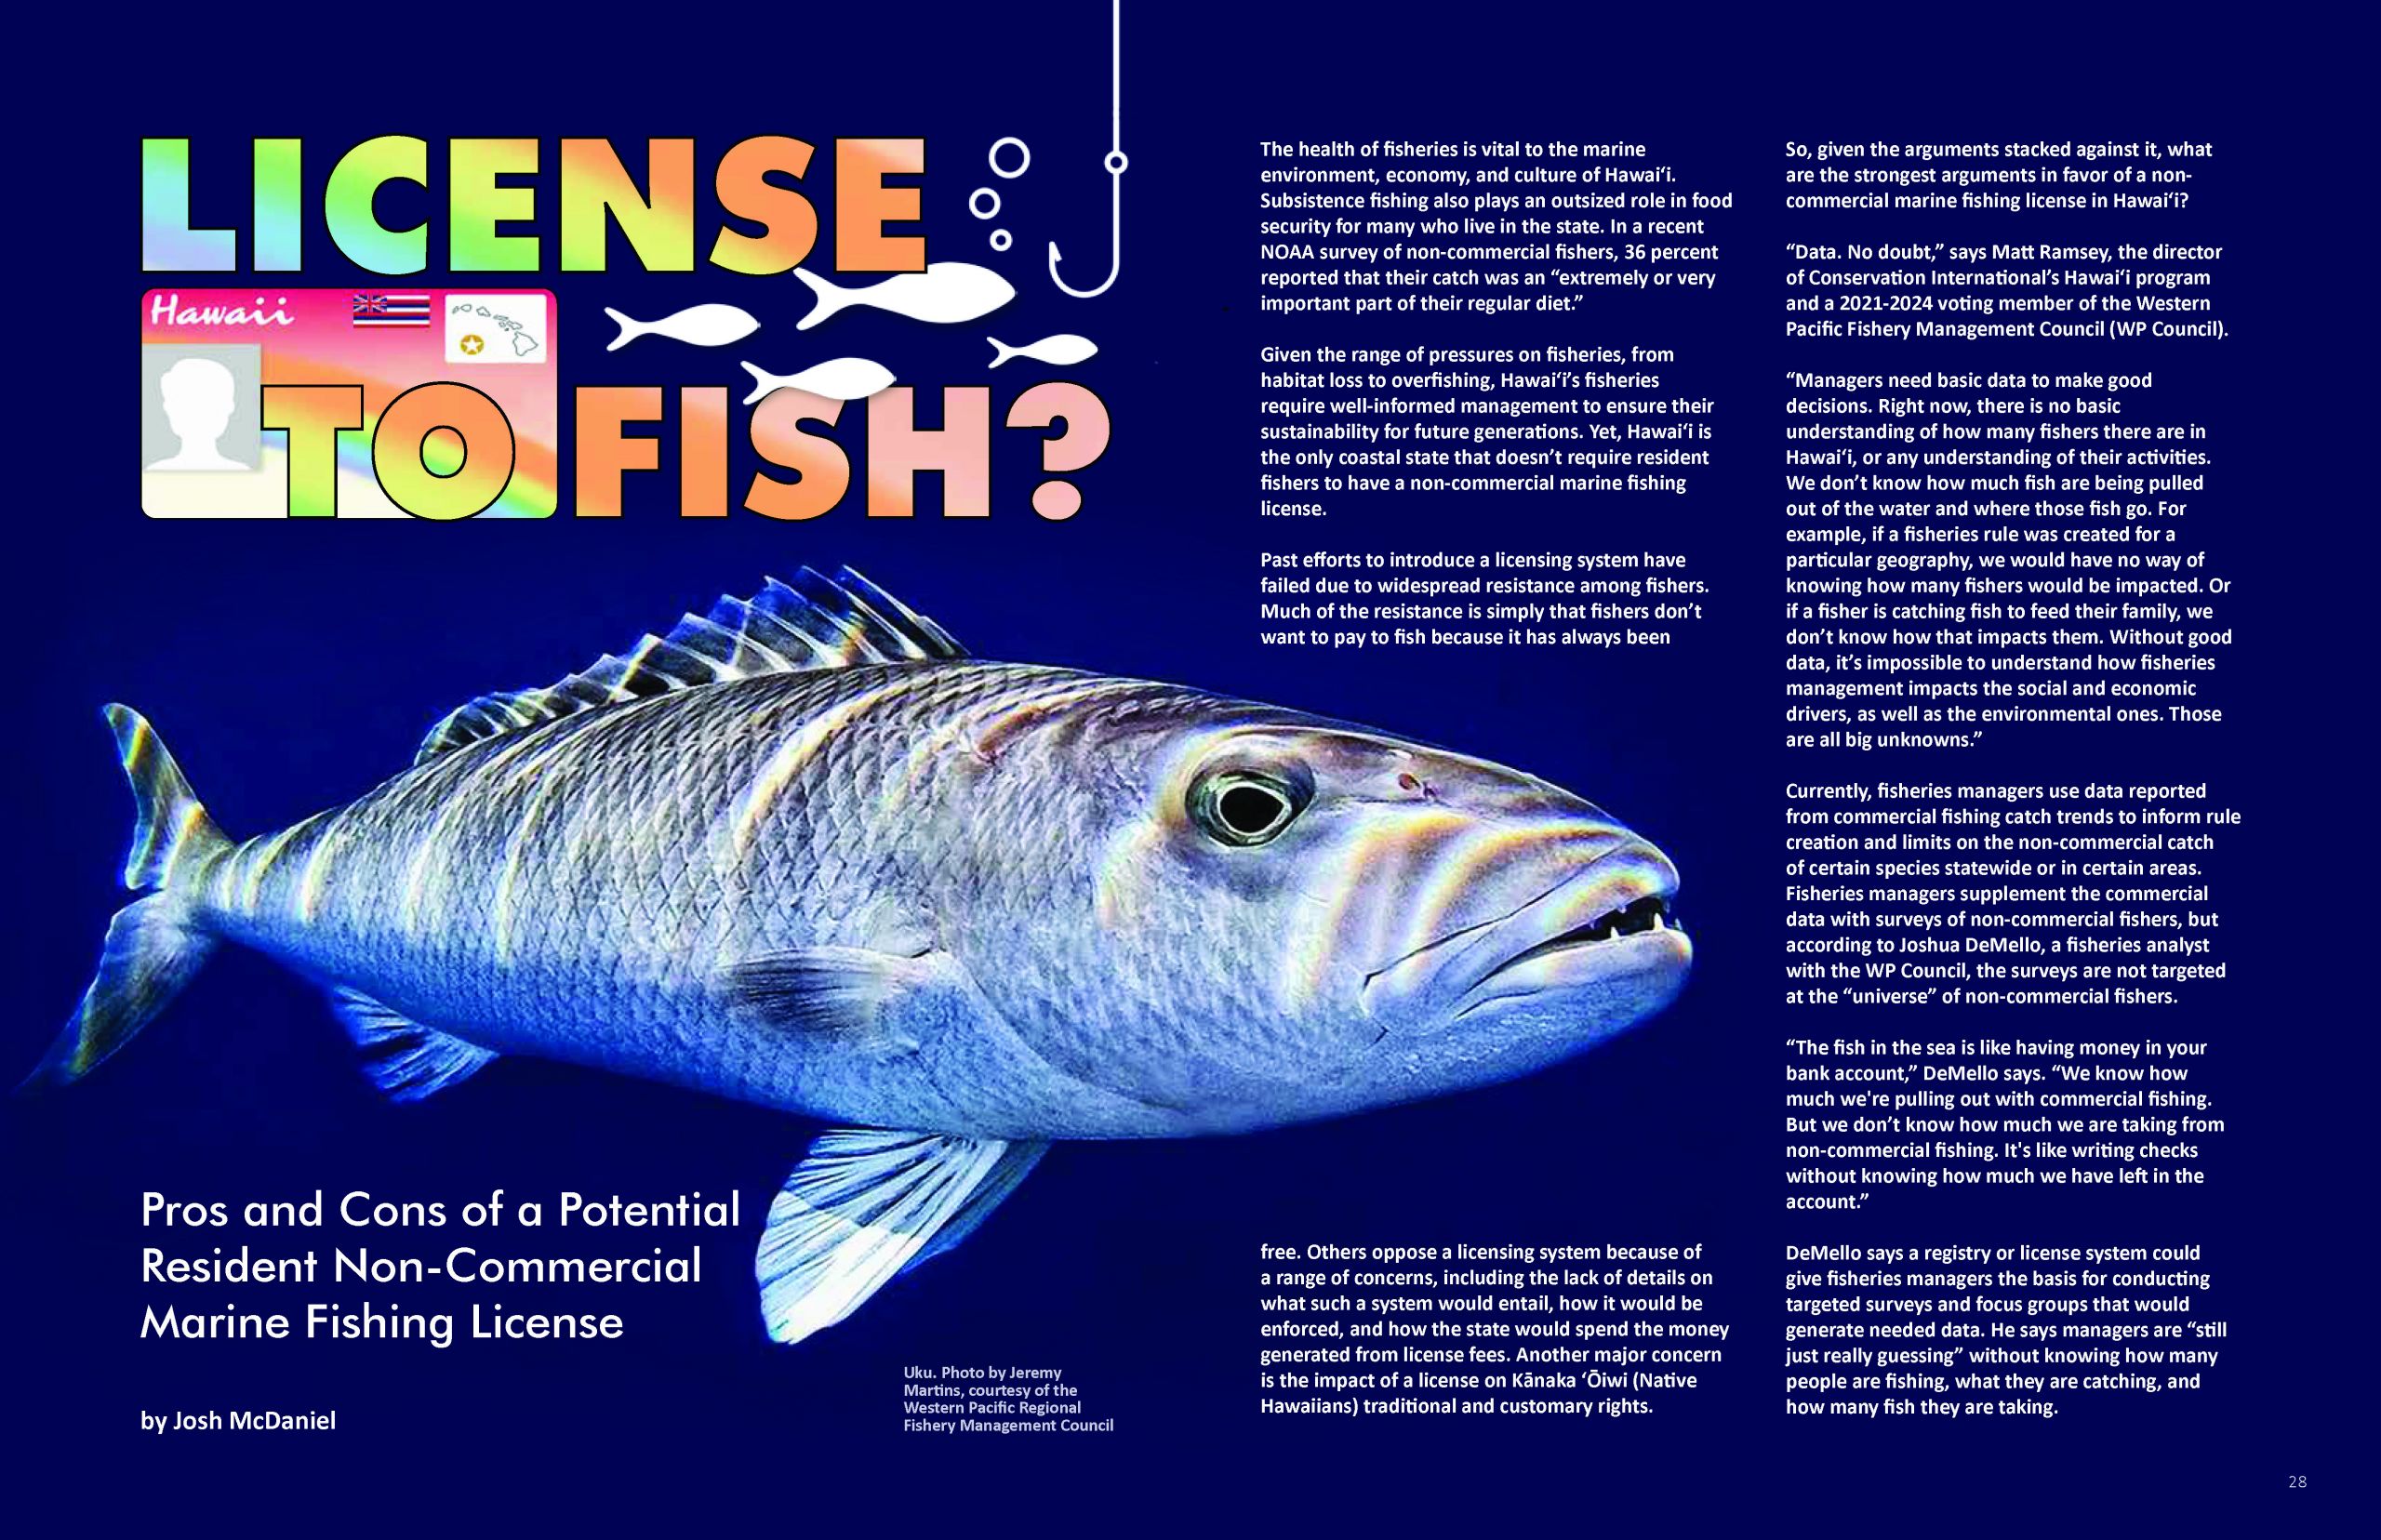 License to Fish? Pros and Cons of a Potential Resident Non-Commercial Marine Fishing License